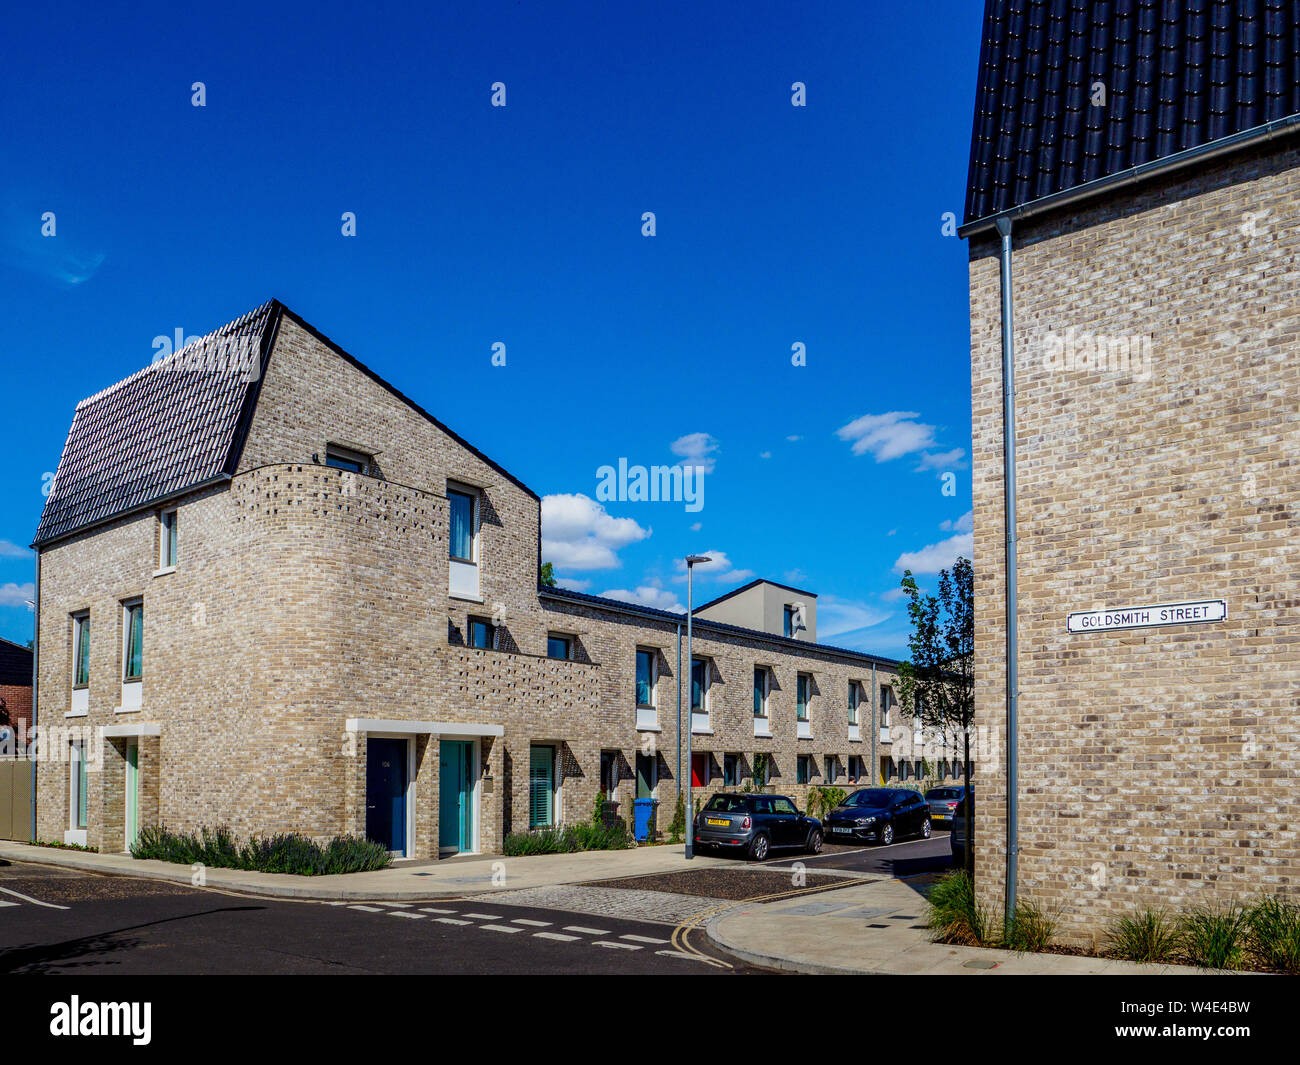 Goldsmith Street Norwich Stirling Prize Winner 2019 - social housing, 105 Passivhaus energy-efficient homes Architect Mikhail Riches with Cathy Hawley Stock Photo